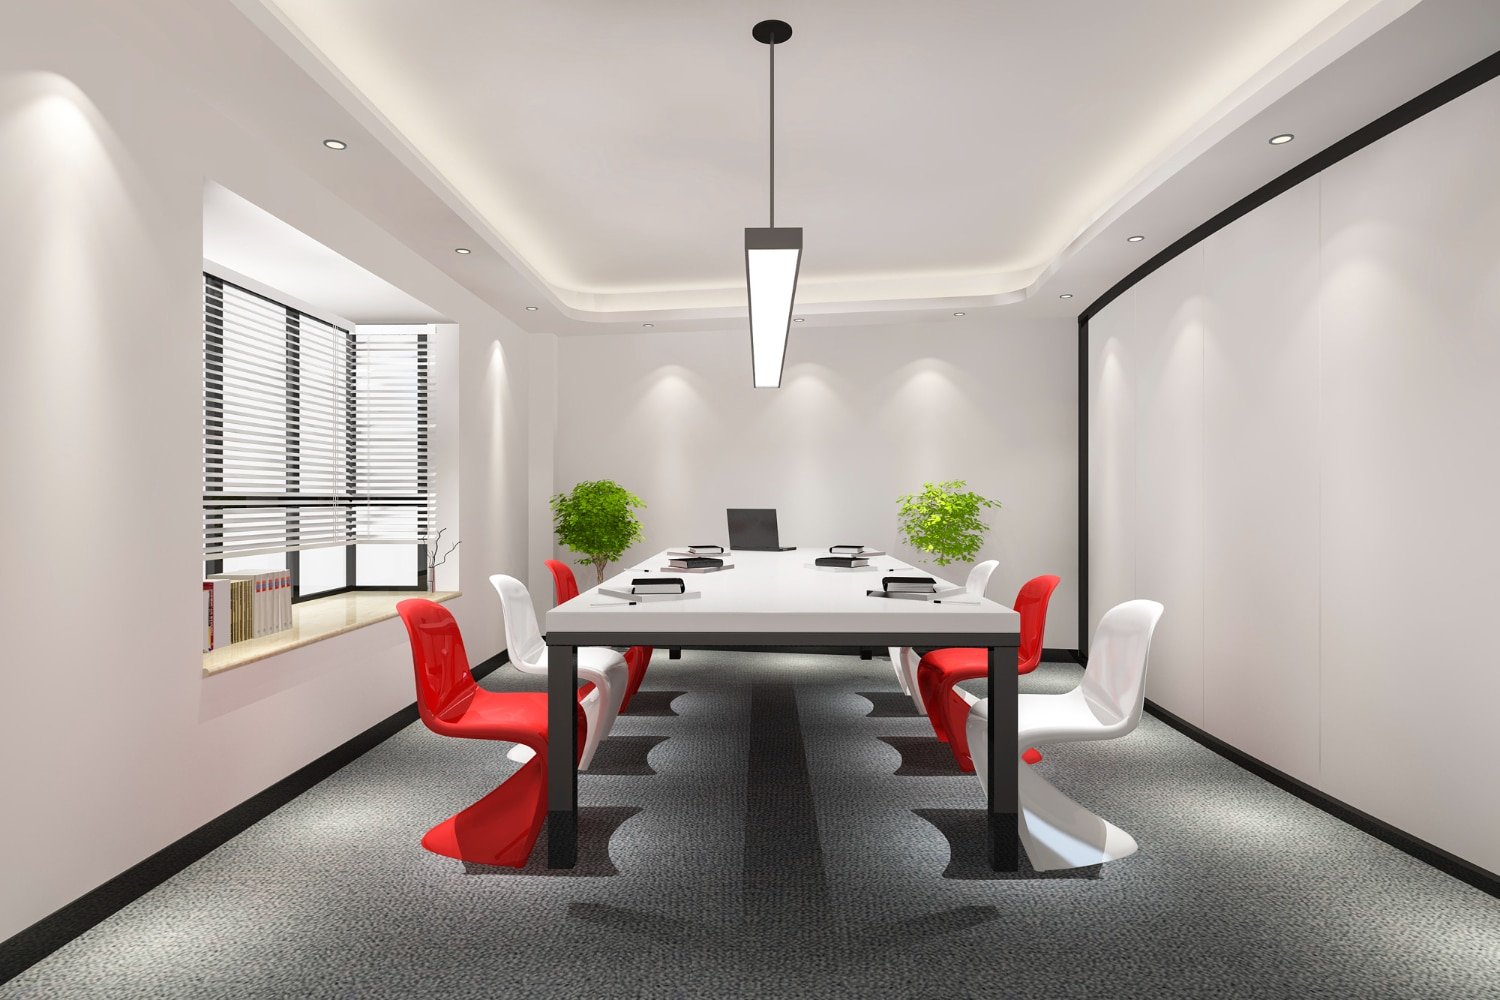 Enhance Your Office With National Business Furniture Inc.'s Modern Solutions